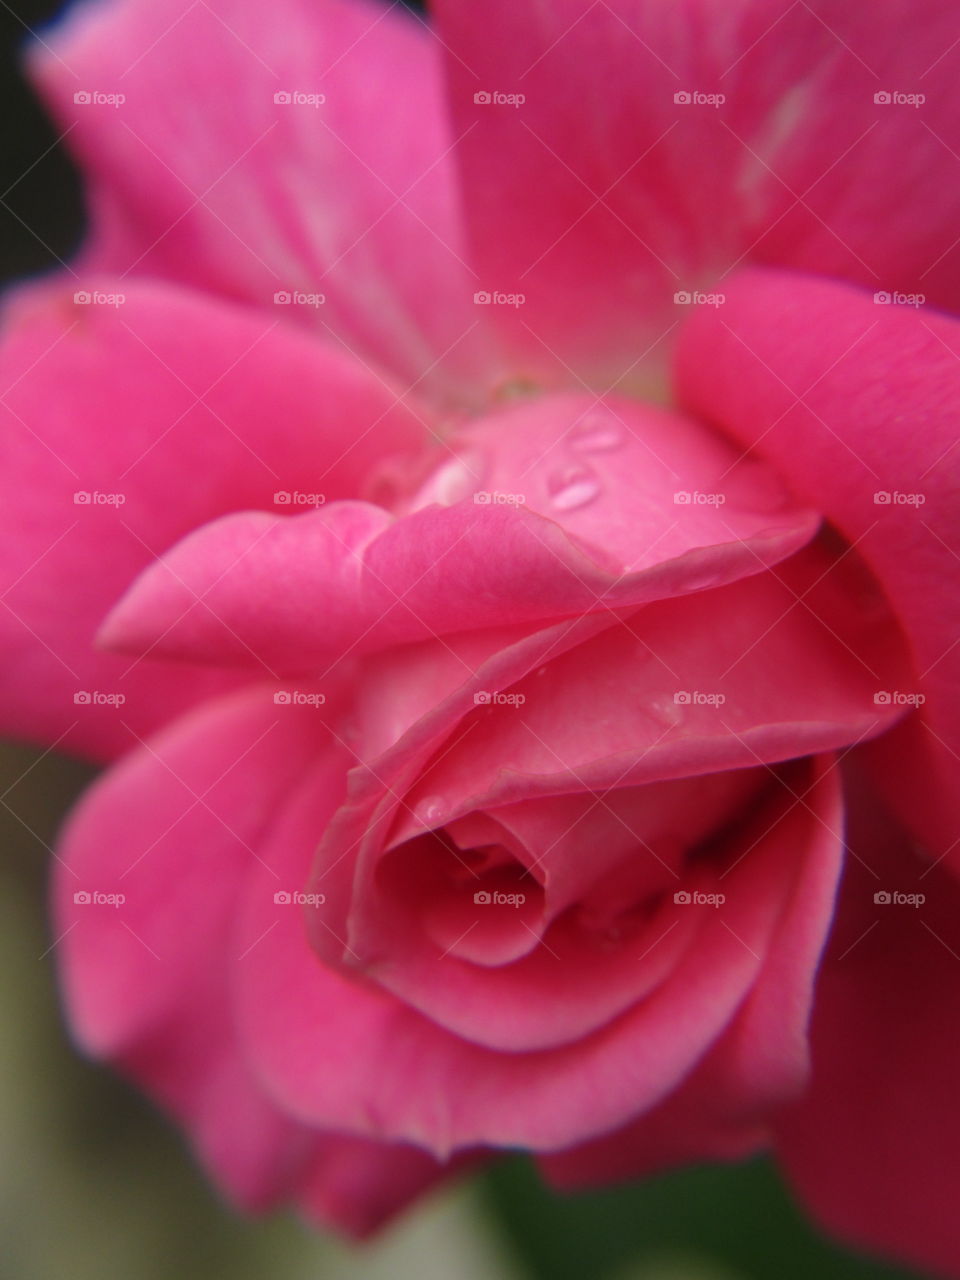 have a nice day. pink rose